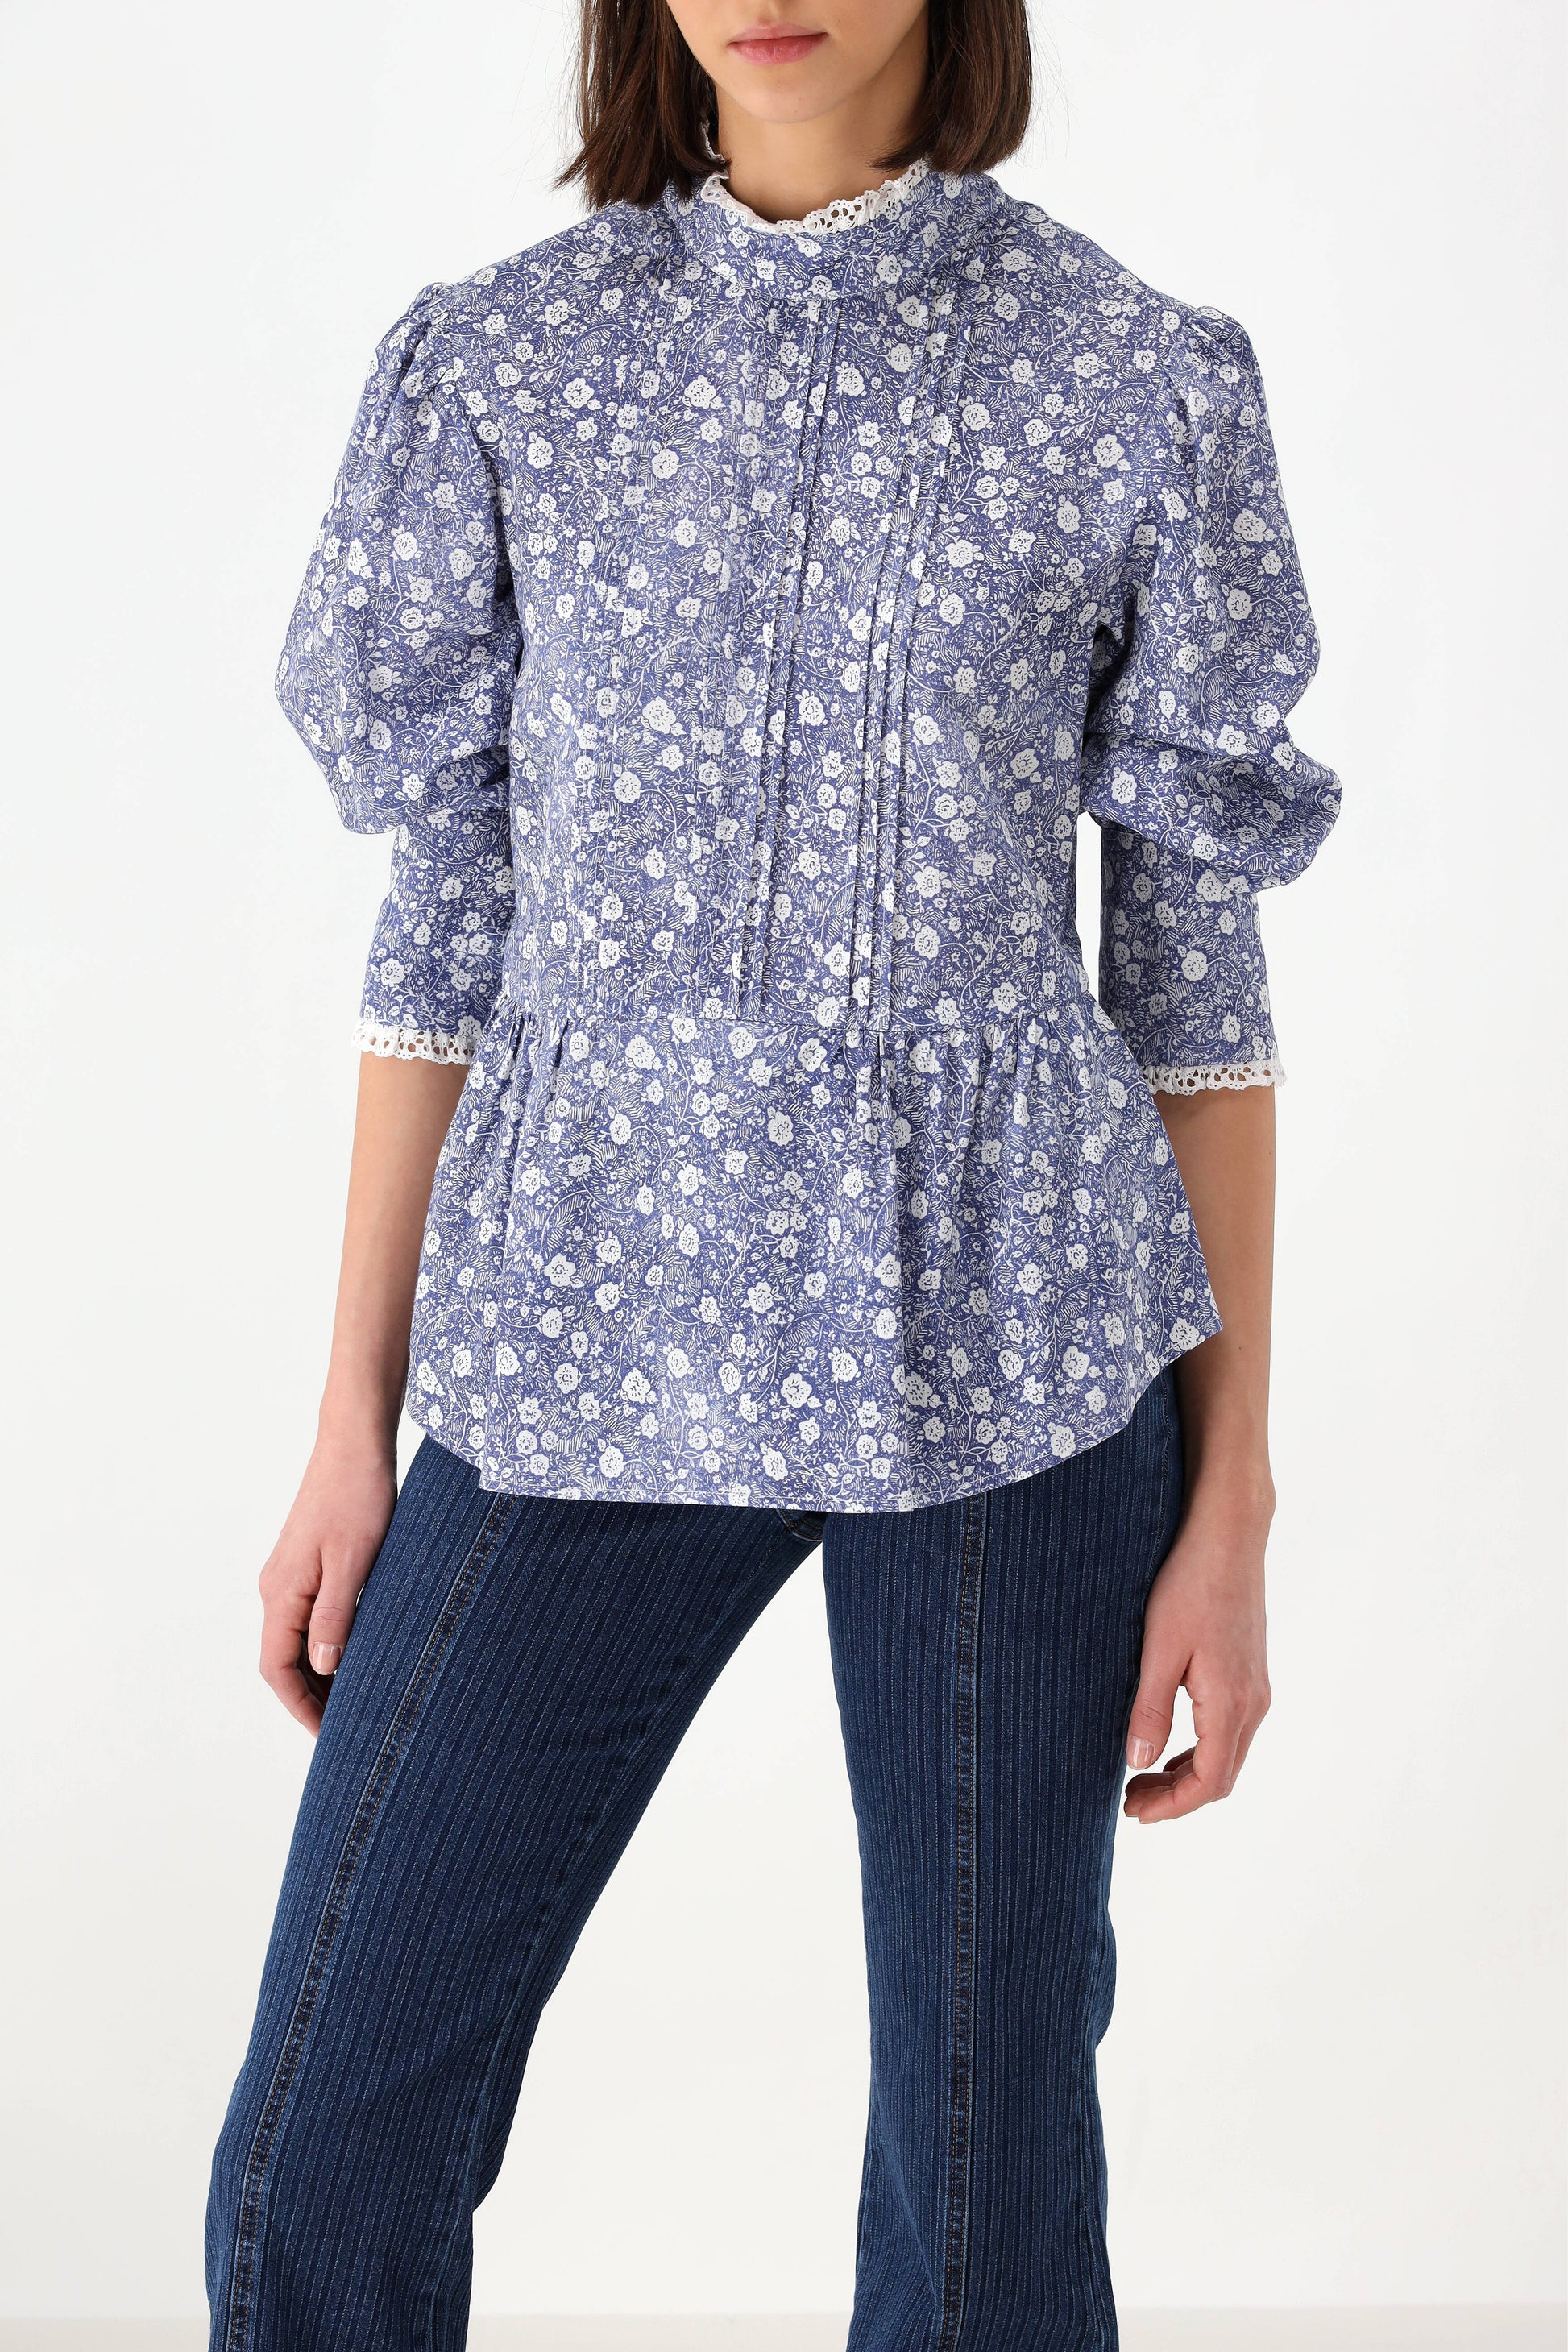 Florale Bluse in Blau/WeißSee by Chloé - Anita Hass